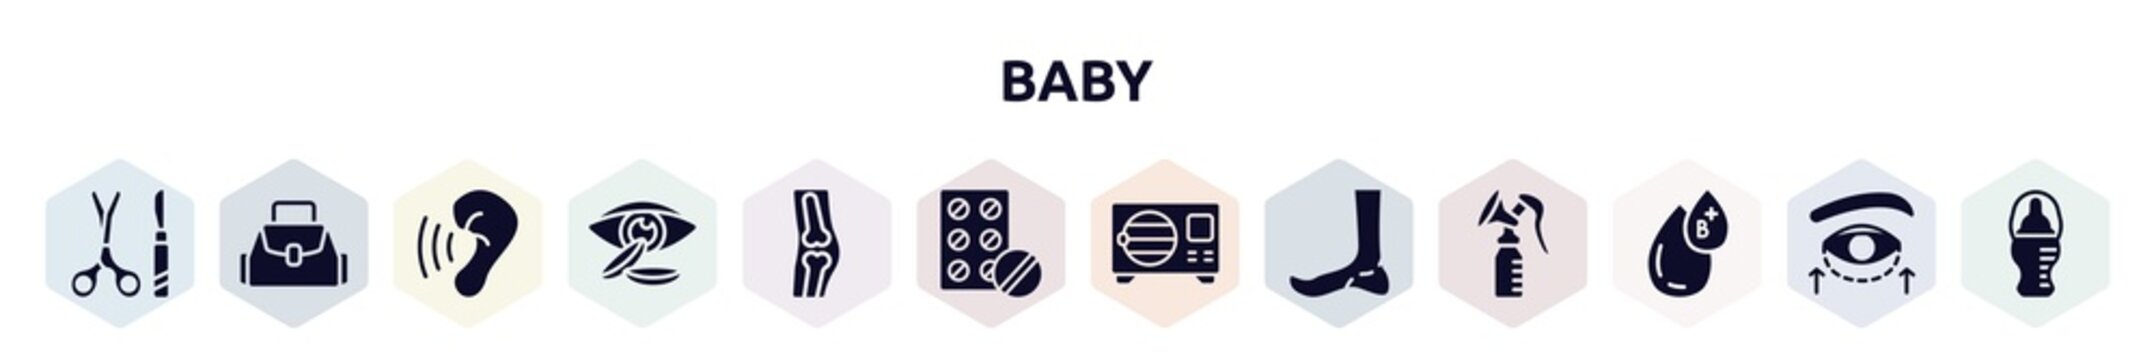 baby filled icons set. glyph icons such as tool surgeon, baby bag, hearing, contact lens, orthopedics, antibiotic, sterilization, ankle, type b icon.